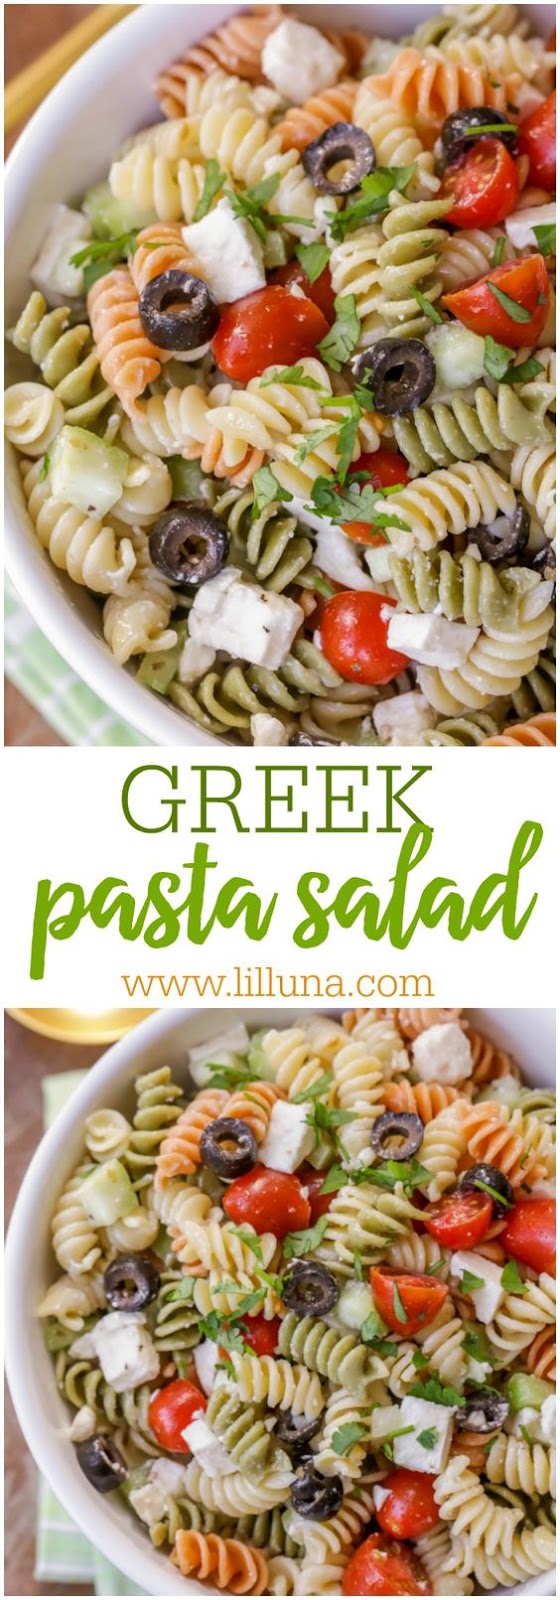 This delicious Greek Pasta Salad is filled with rotini pasta, tomatoes, cucumber, olives, and feta cheese and is covered in a tasty greek dressing! It's our new go-to pasta salad and is perfect especially in spring and summer.